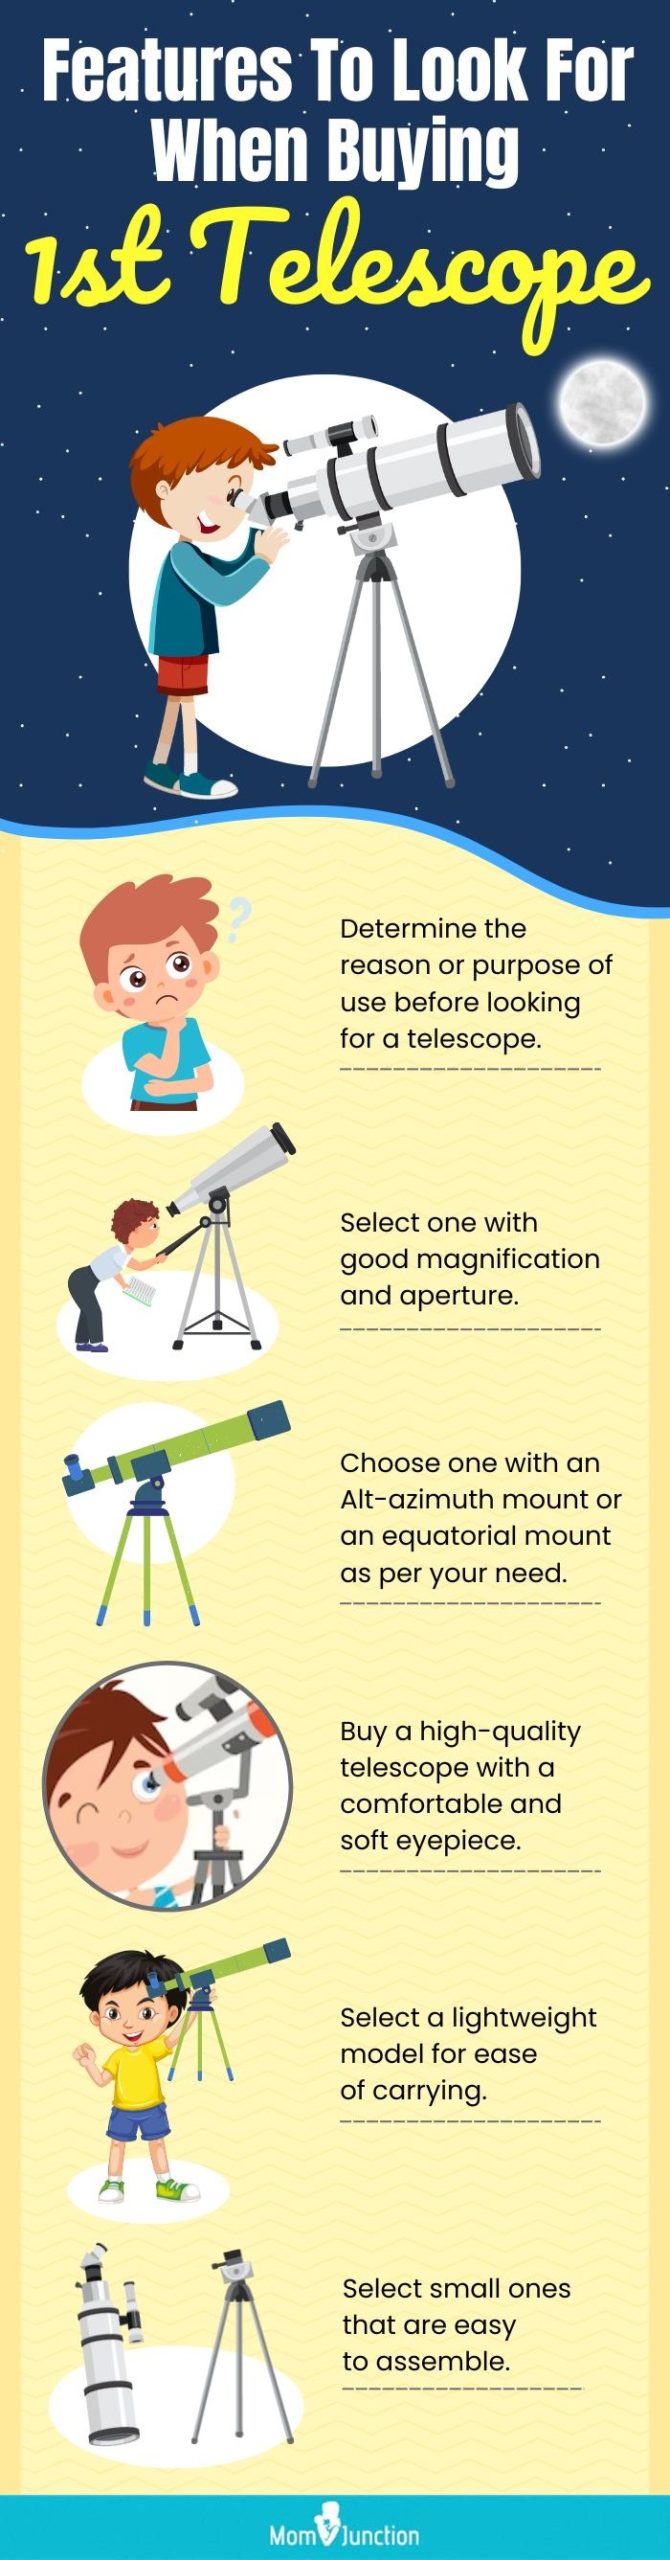 Features To Look For When Buying First Telescope (infographic)